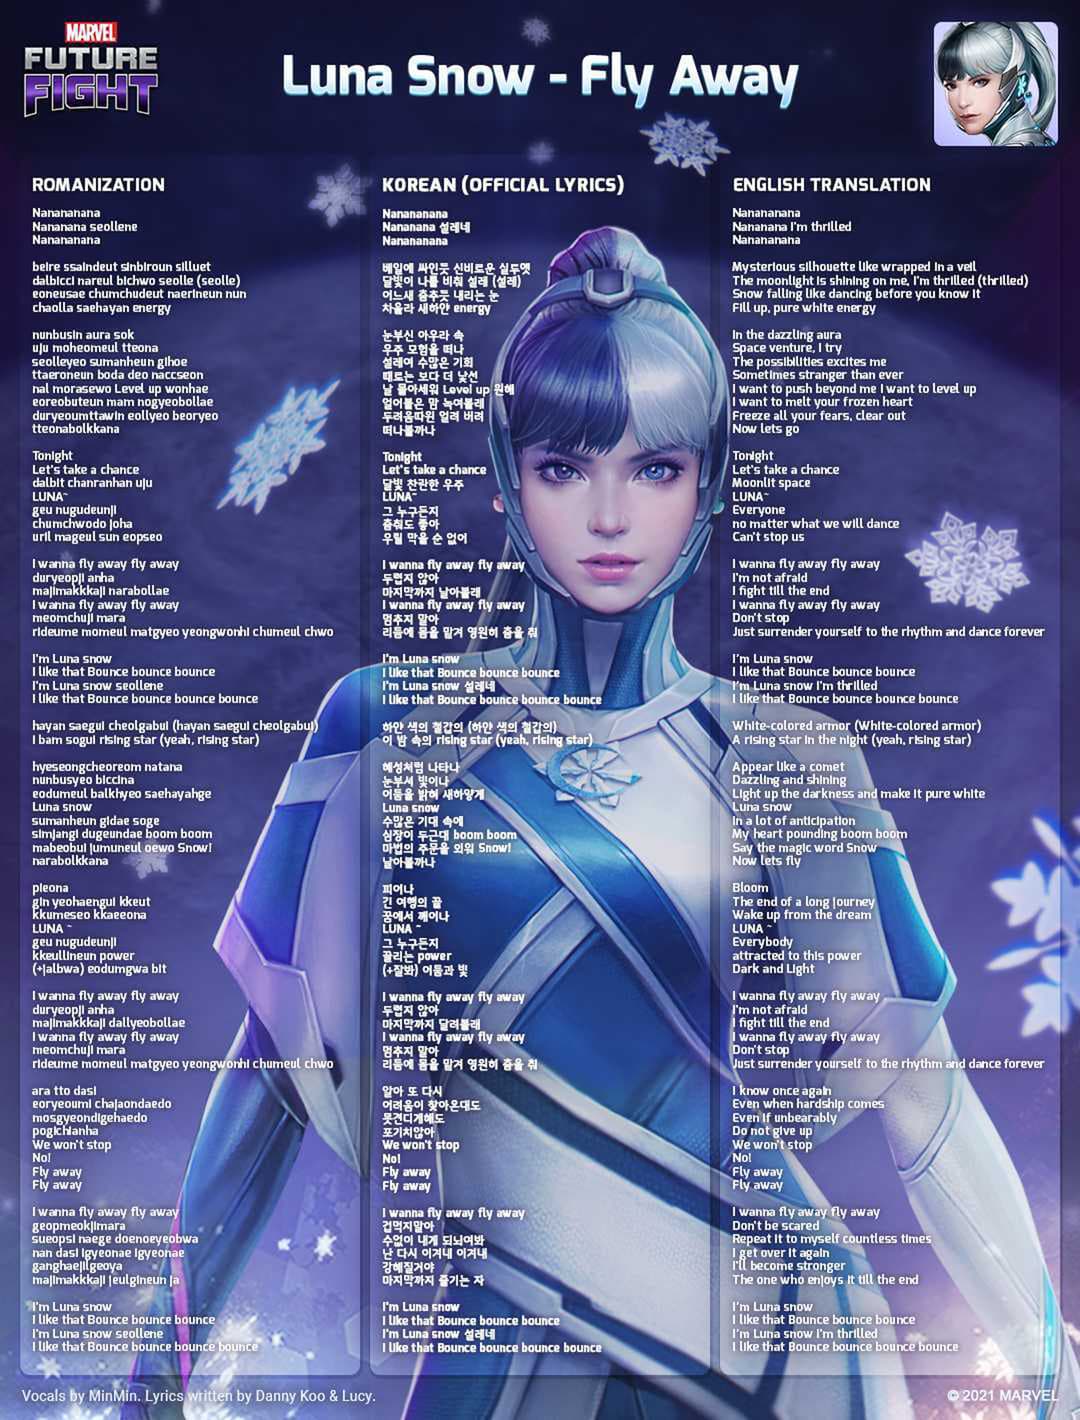 MARVEL Future Fight Luna Snow "Fly Away" Songsheet Lyrics Korean and English Vocals by MinMin Written by Danny Koo & Lucy